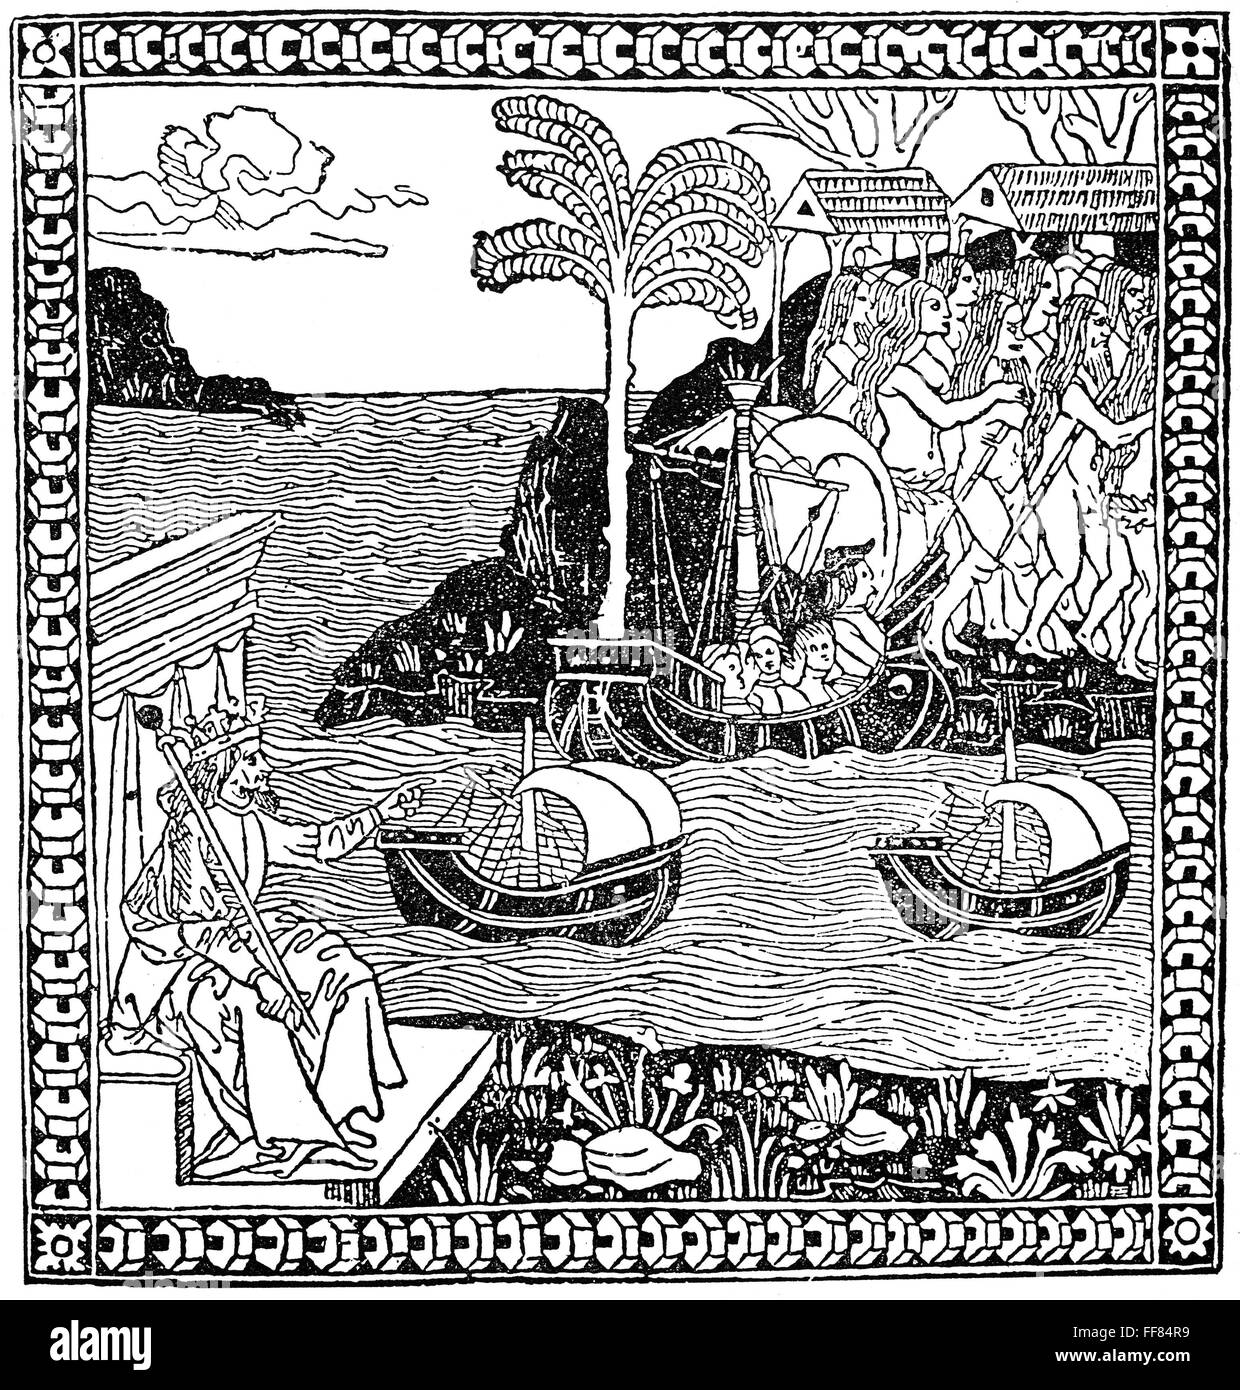 Columbus In New World Nthe Earliest Depiction Of Christopher Columbus